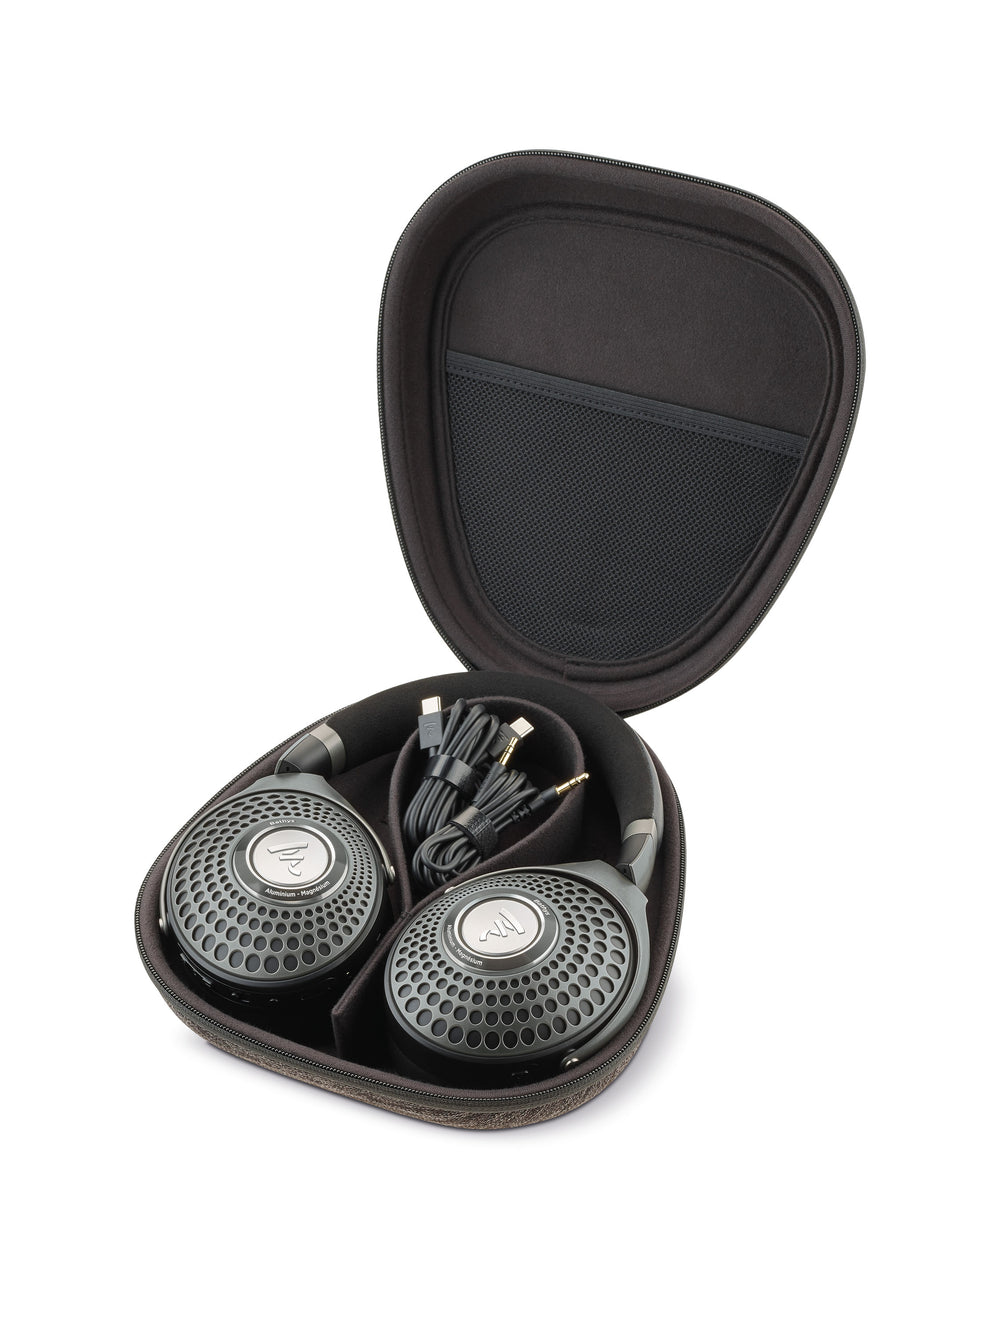 A shot of the Focal Bathys wireless noise-cancelling headphones box contents showing an open rigid carrying case holding the headphones and some cables. 